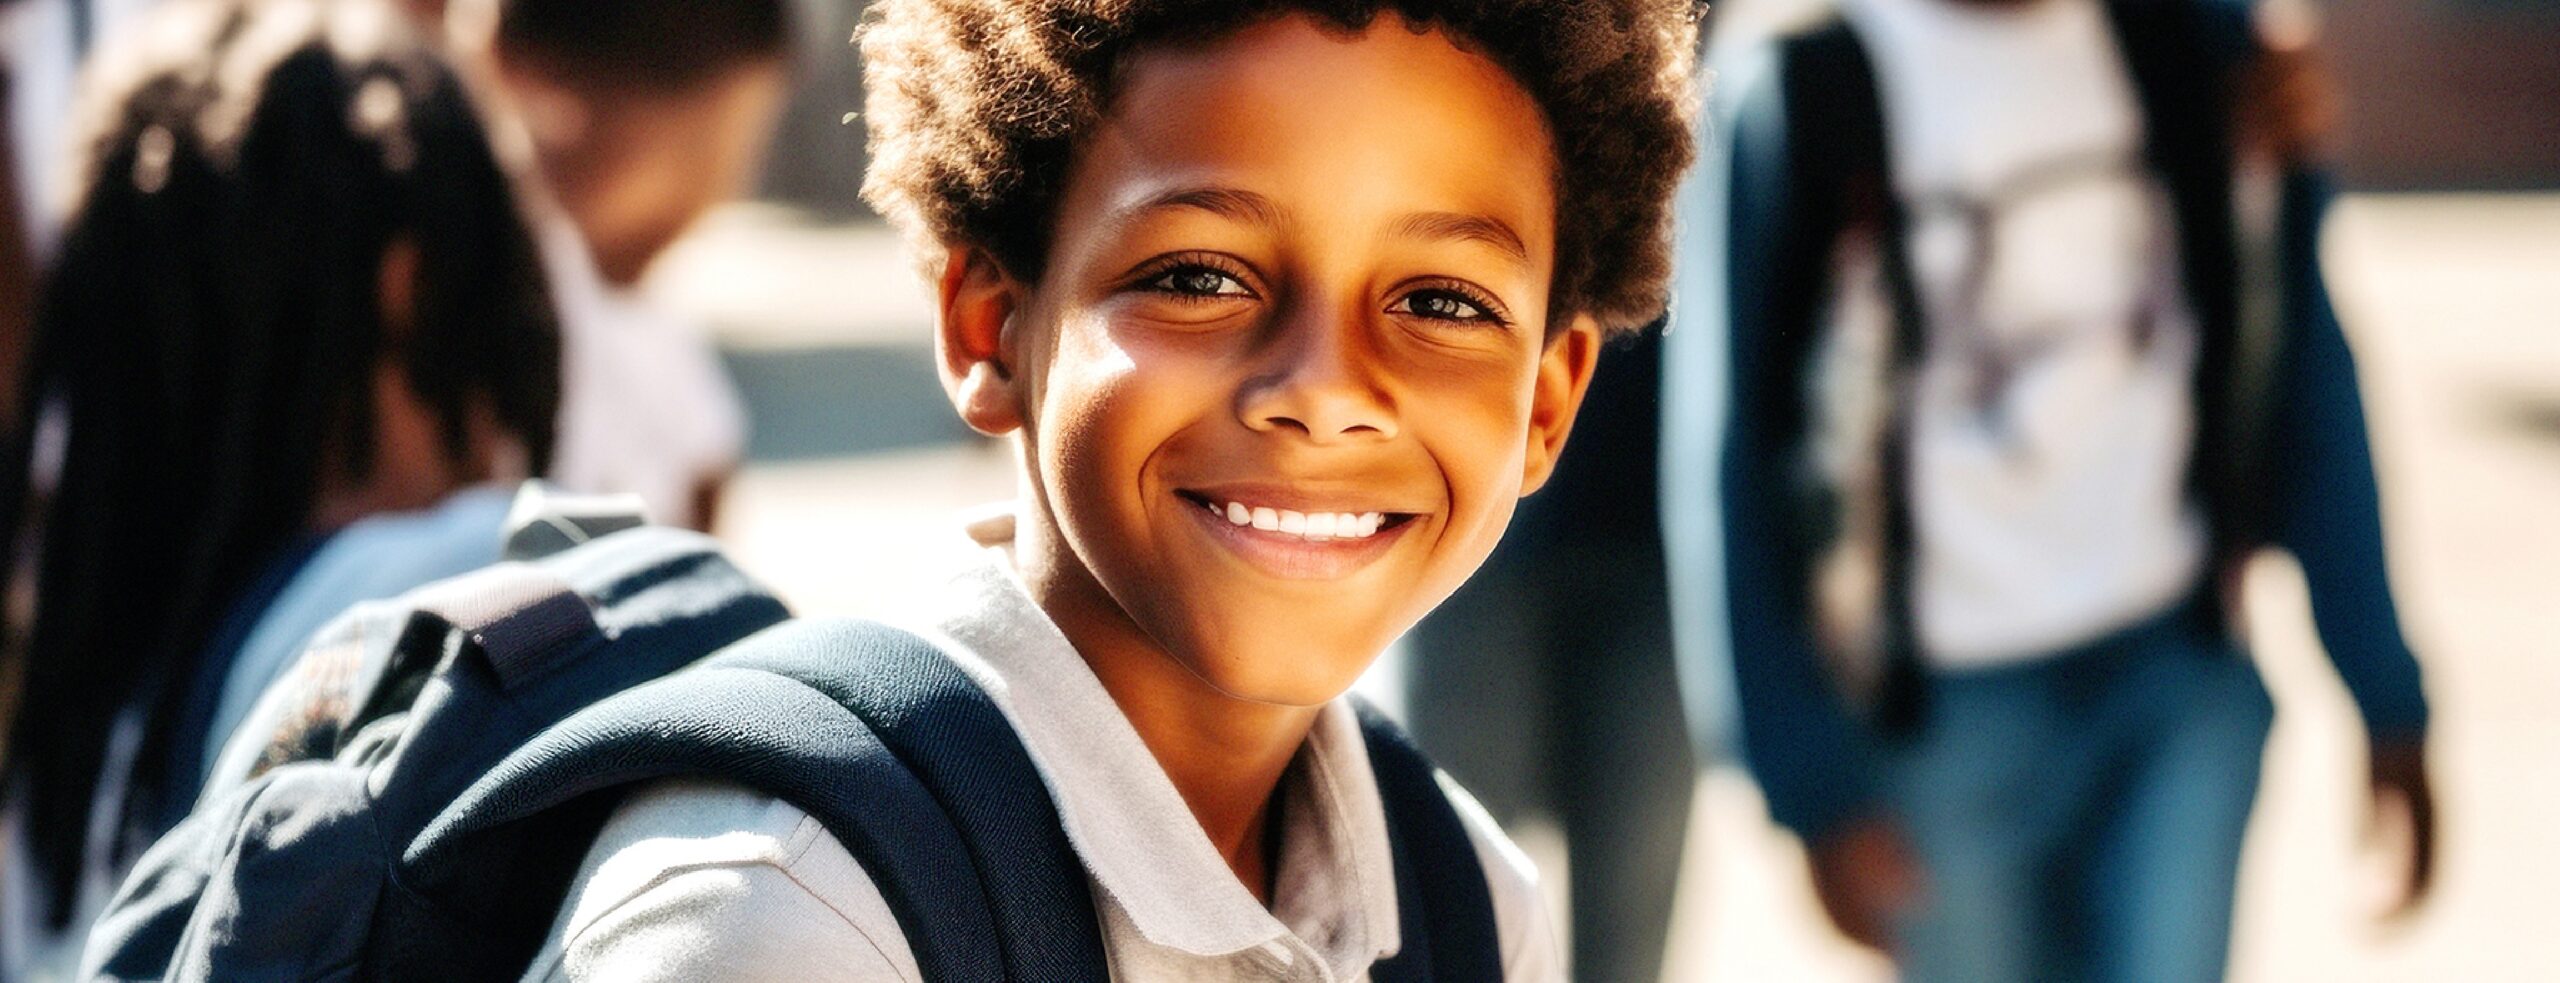 Smiling Boy With Backpack